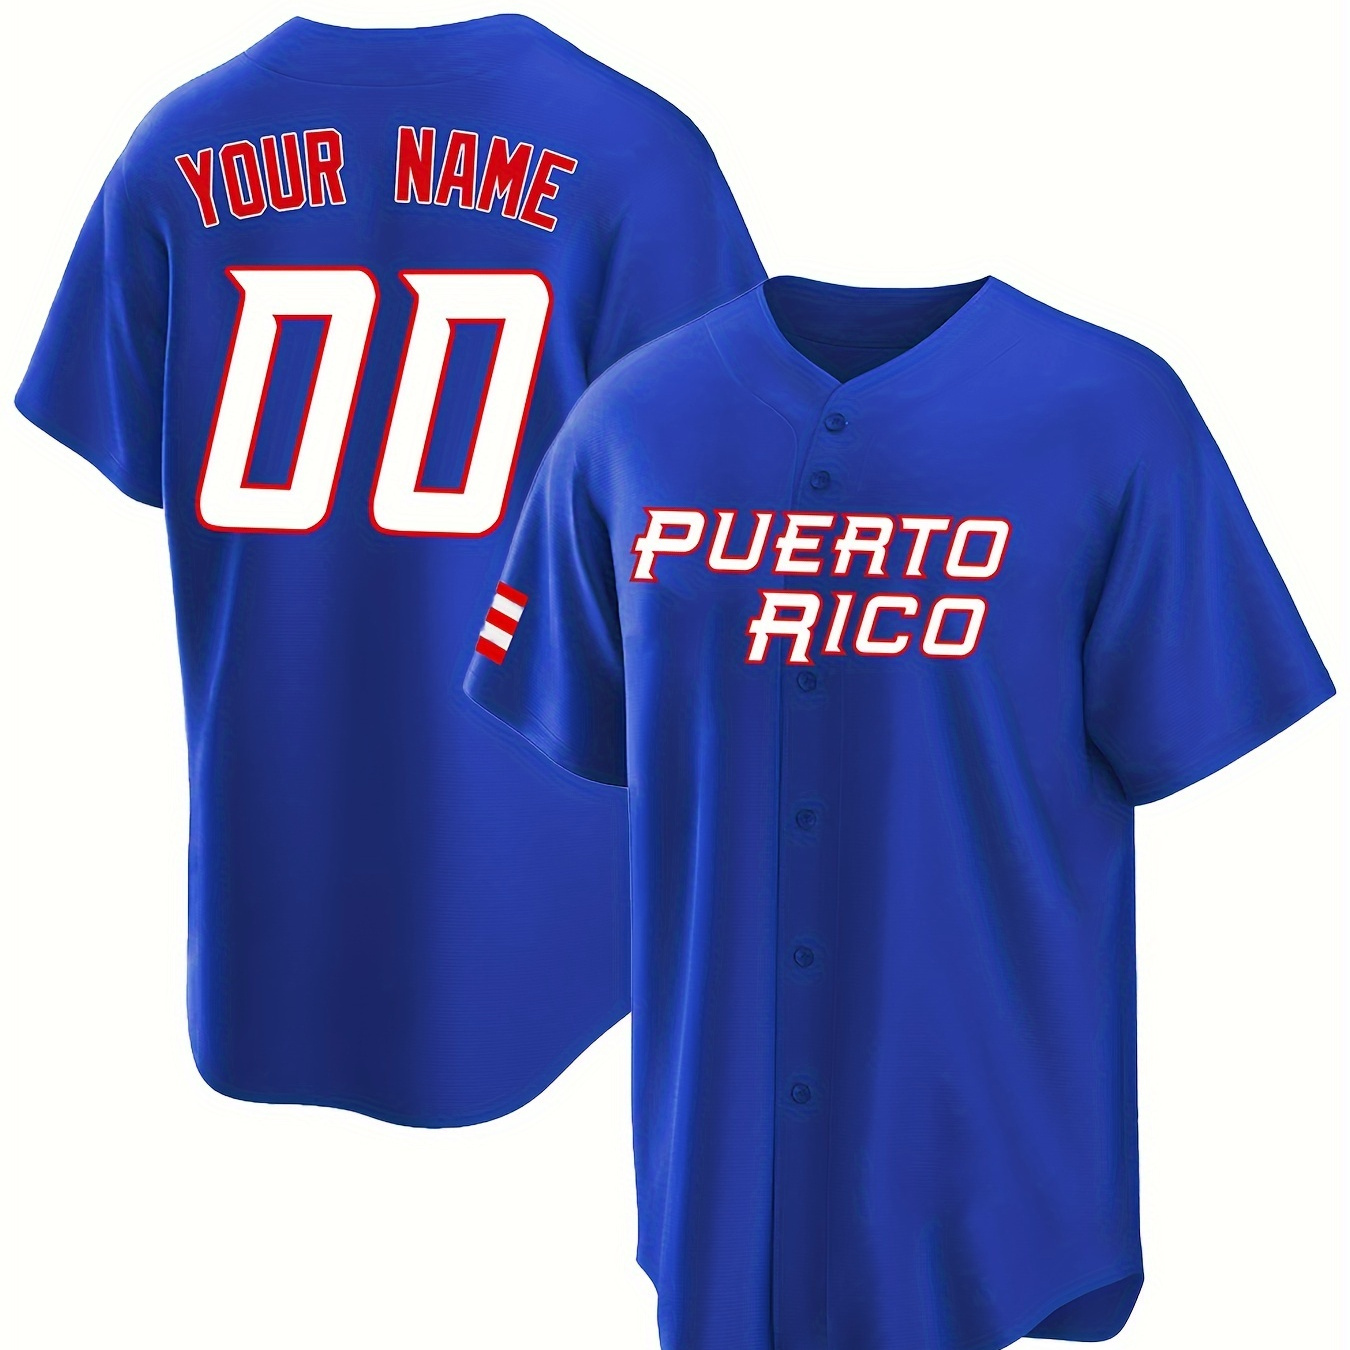 

Customized Name And Number Design, Men's Puerto Rico Embroidery Short Sleeve Loose Breathable V-neck Baseball Jersey, Sports Shirt For Team Training